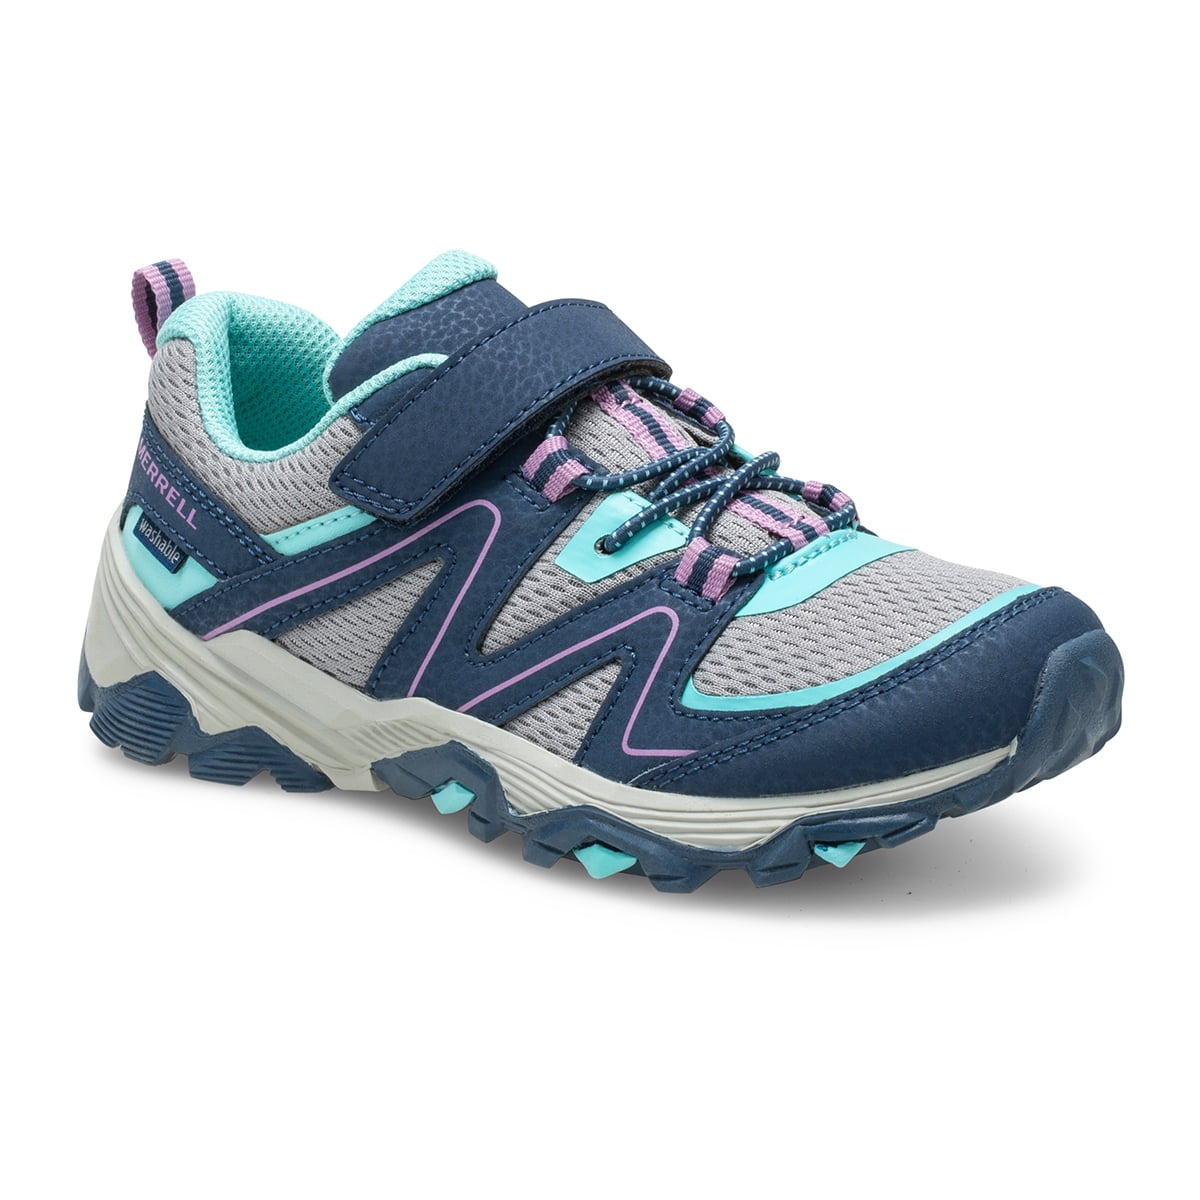 Merrell Trail Quest Big Kid 1.5 Navy/Grey/Turquoise